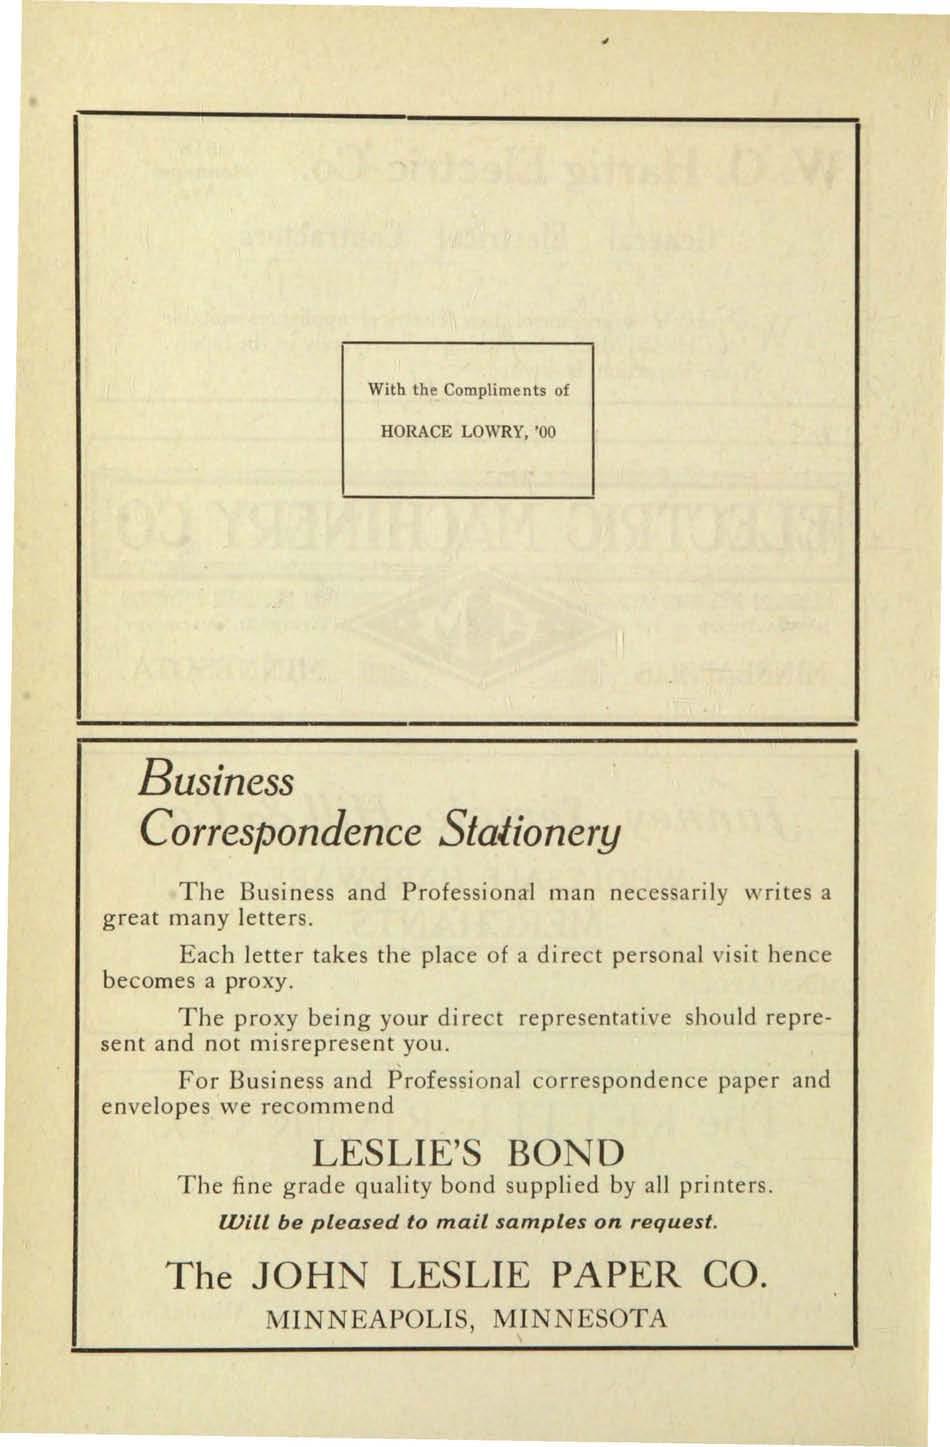 With the Compliments of HORACE LOWRY, '00 Business Correspondence SlaJionery The Business and Professional man necessarily writes a great many letters.